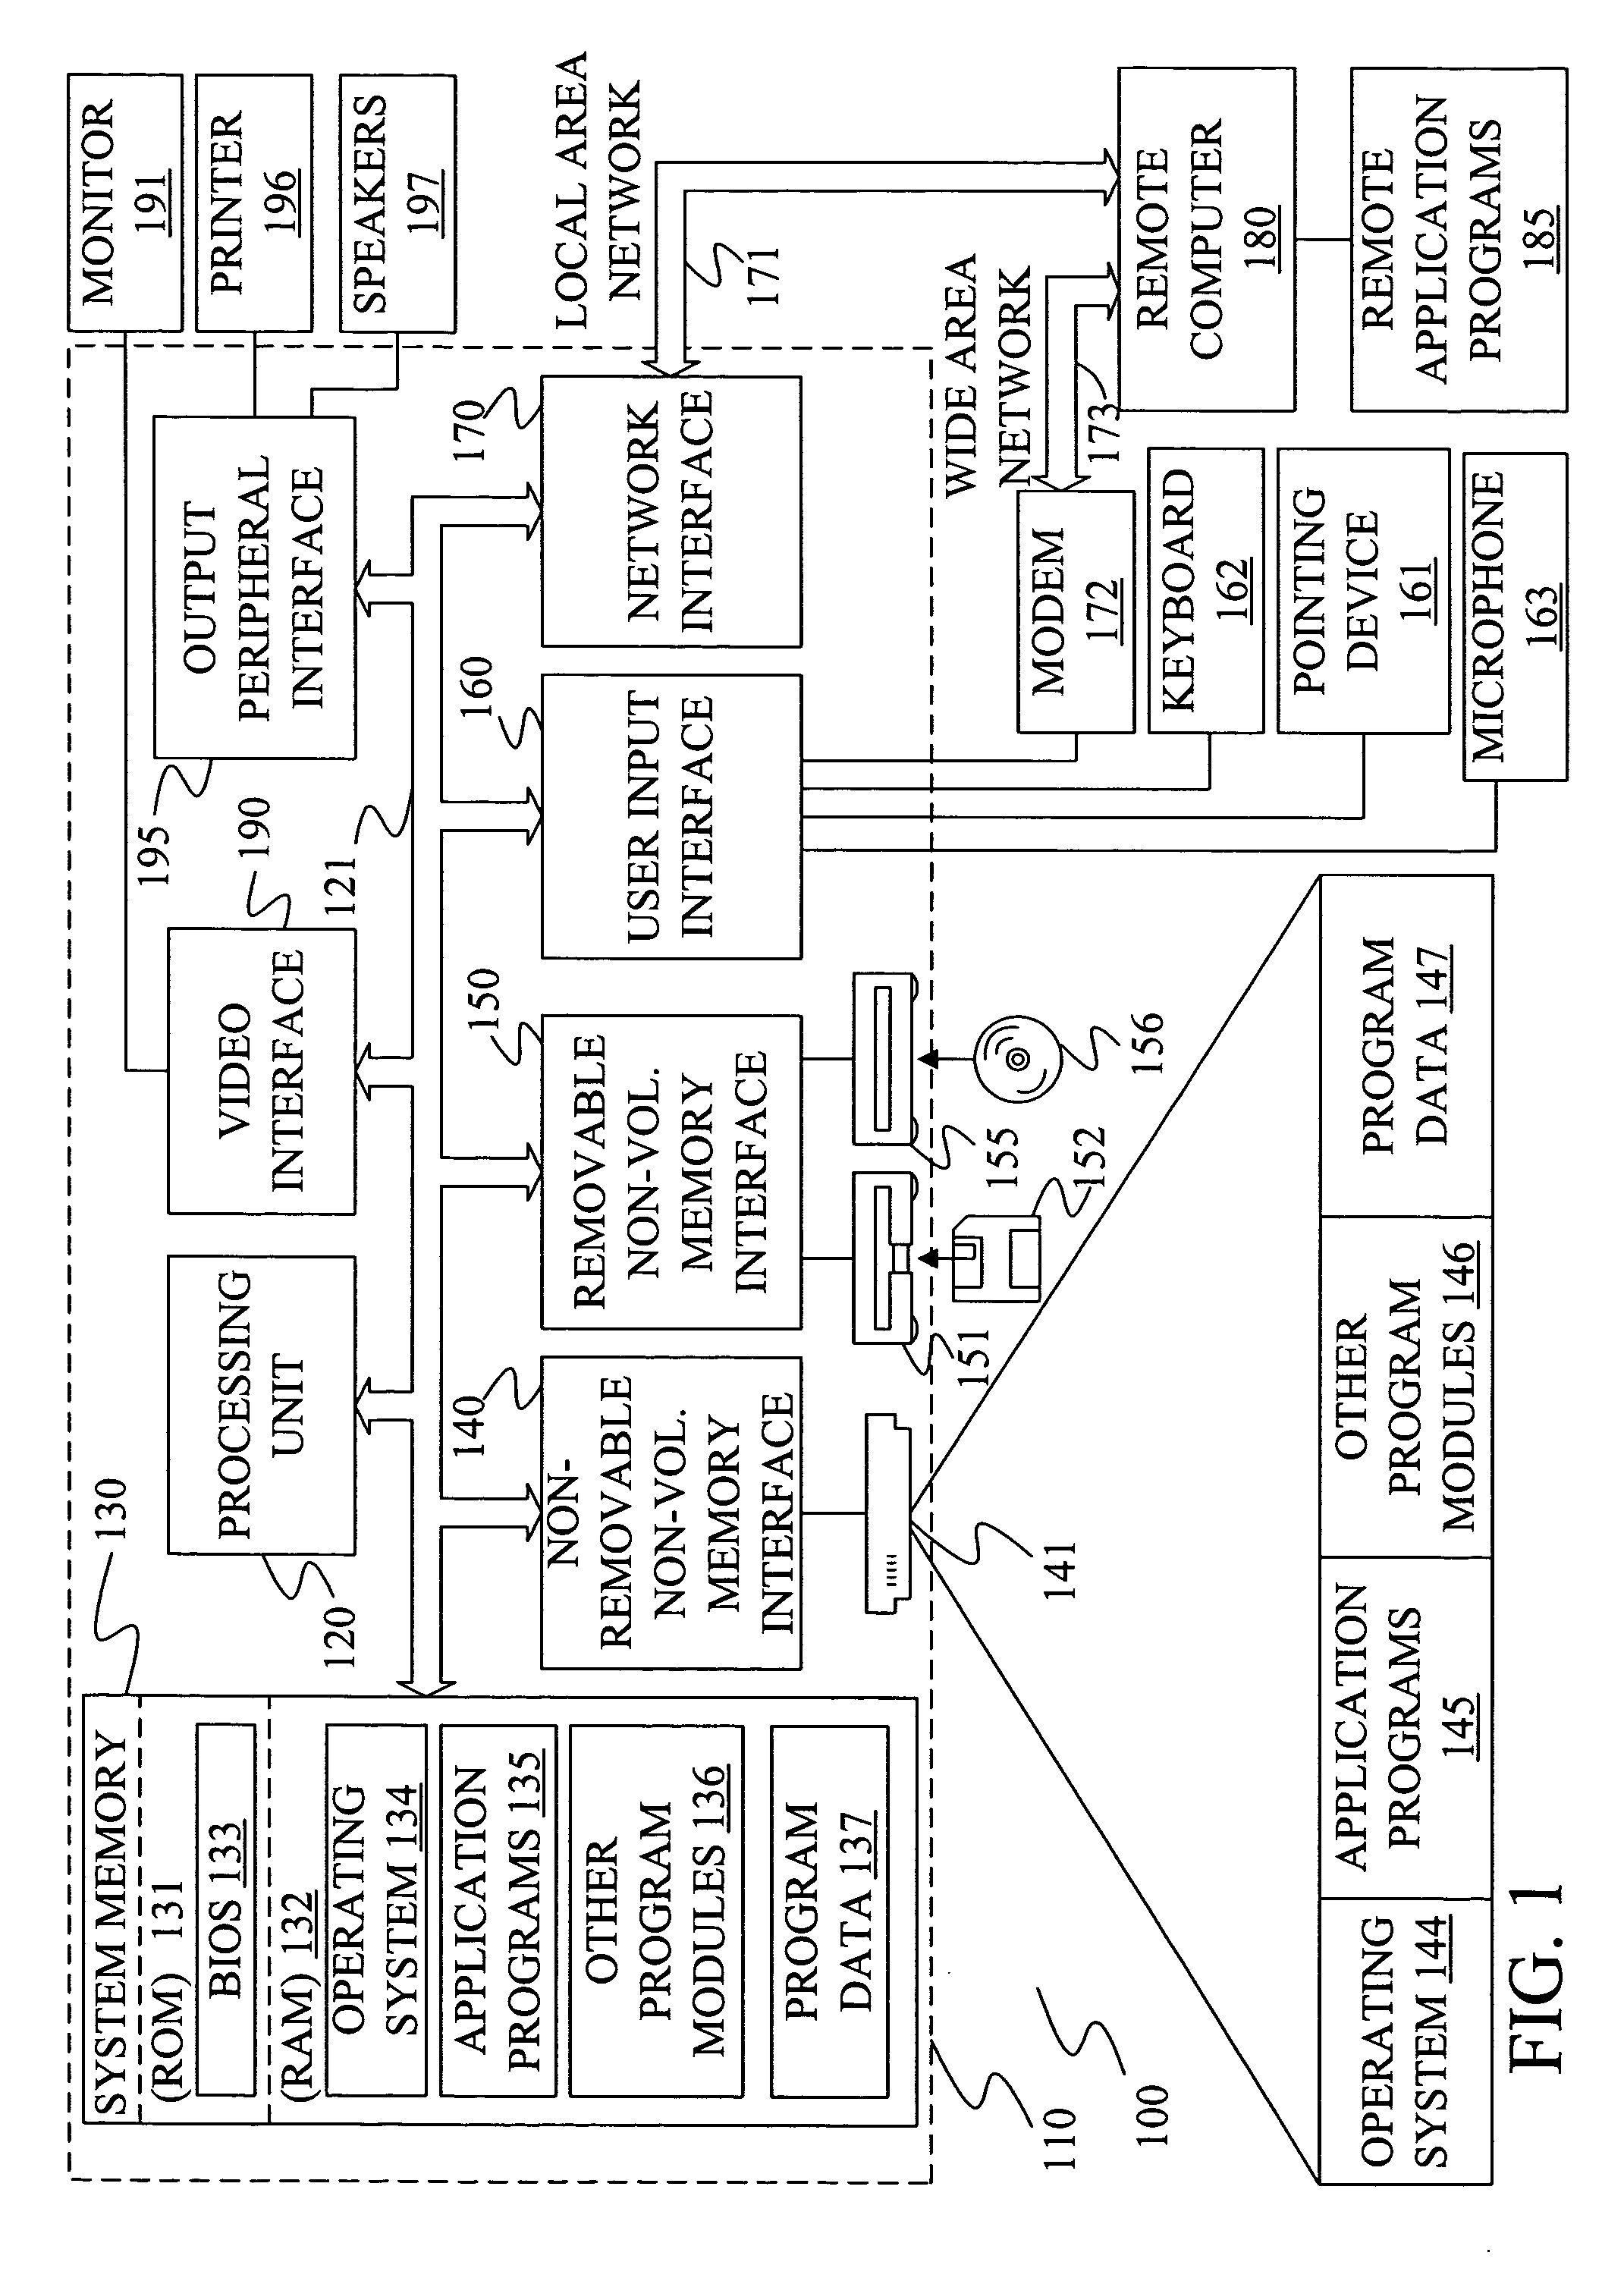 Method and apparatus for determining unbounded dependencies during syntactic parsing